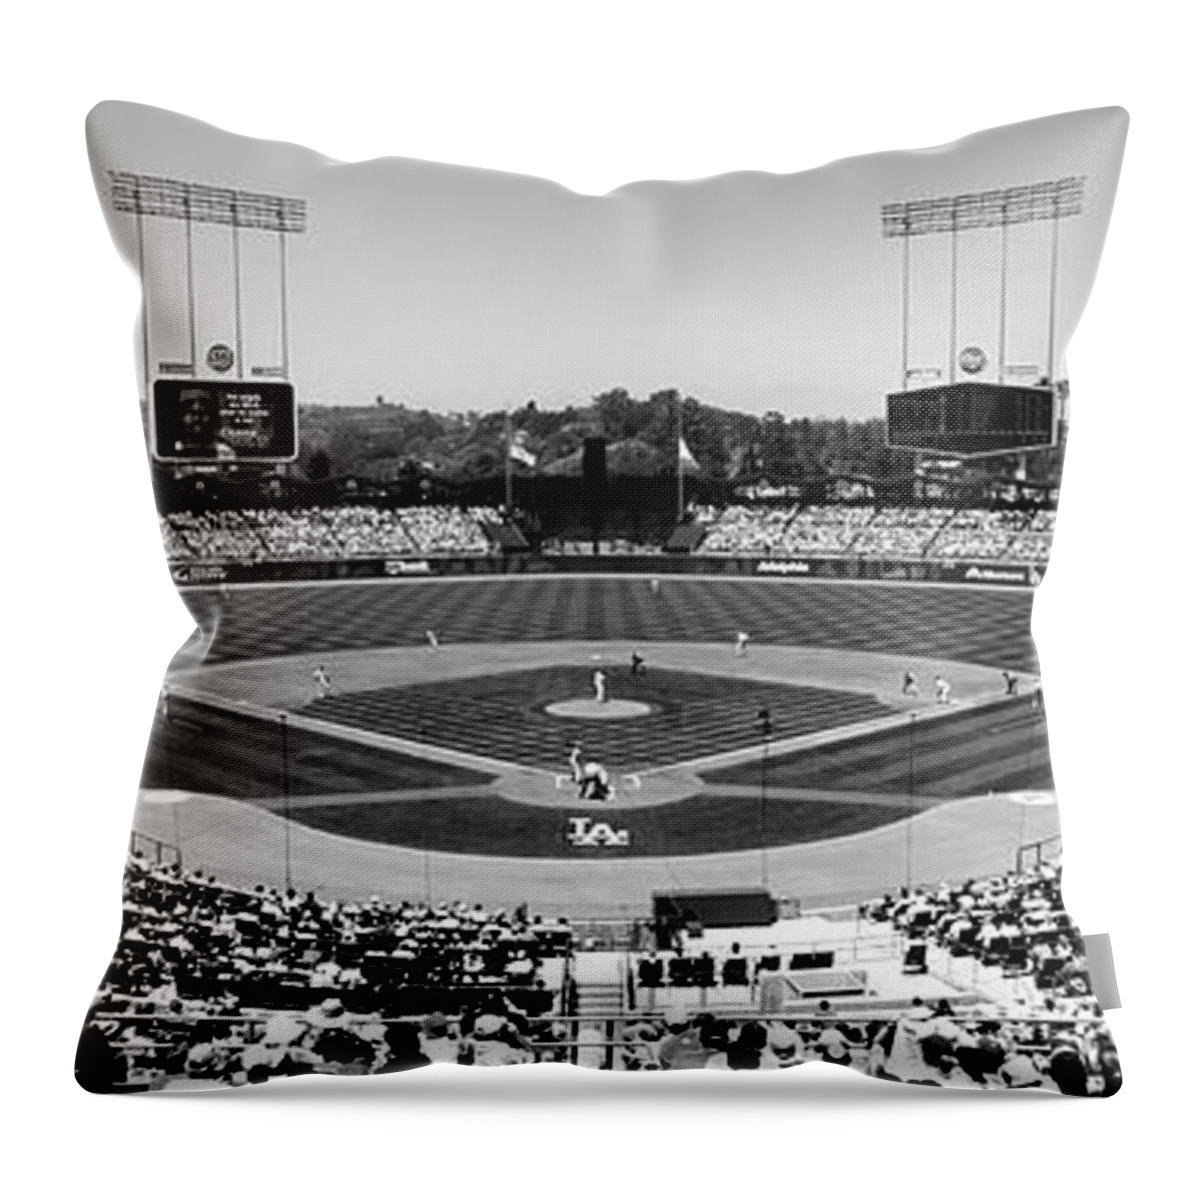 Photography Throw Pillow featuring the photograph High Angle View Of Spectators Watching #3 by Panoramic Images